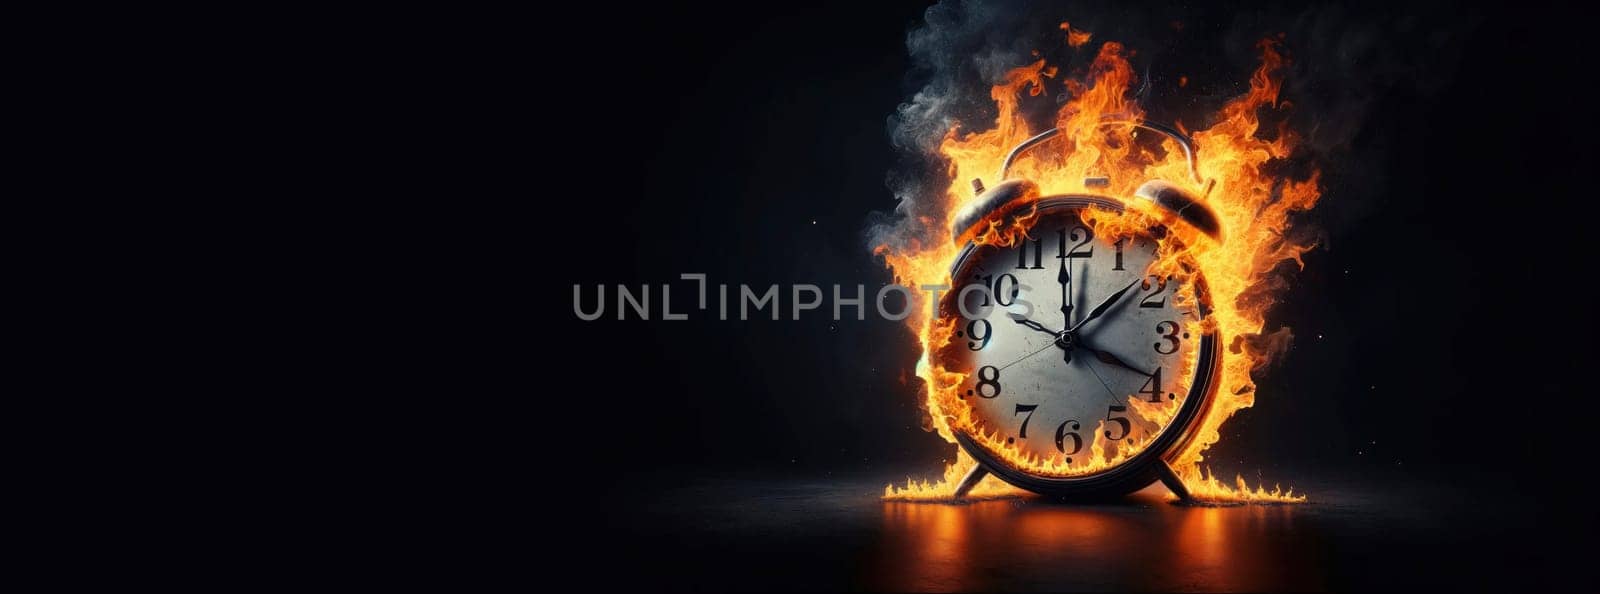 Clock face engulfed in flames, depicting the transient essence of time